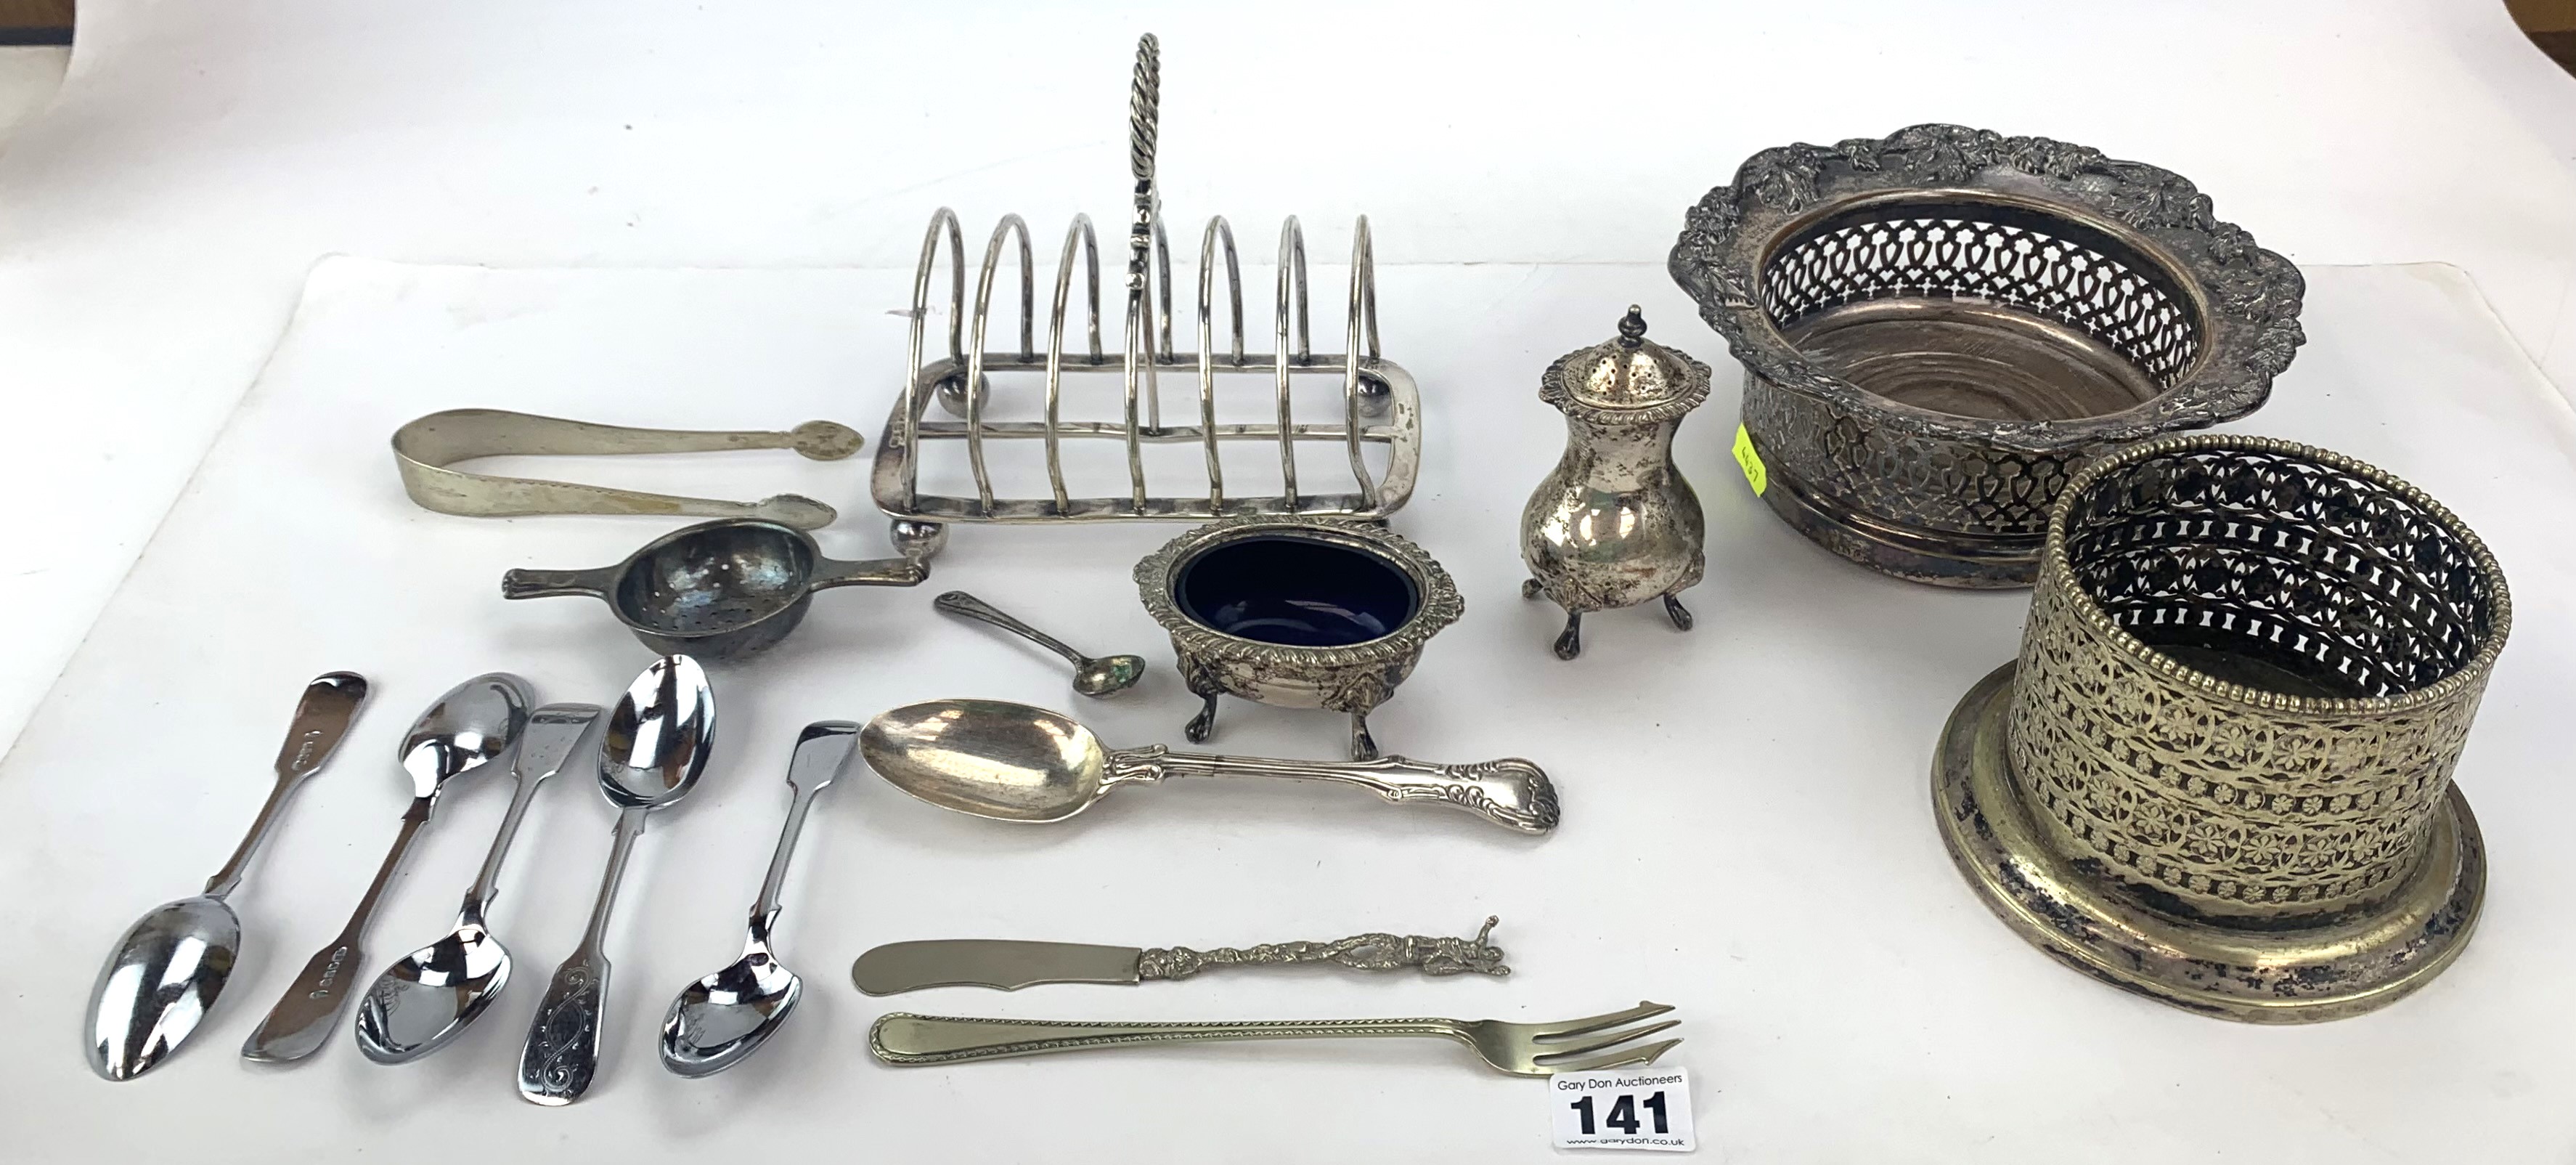 Assorted plated ware